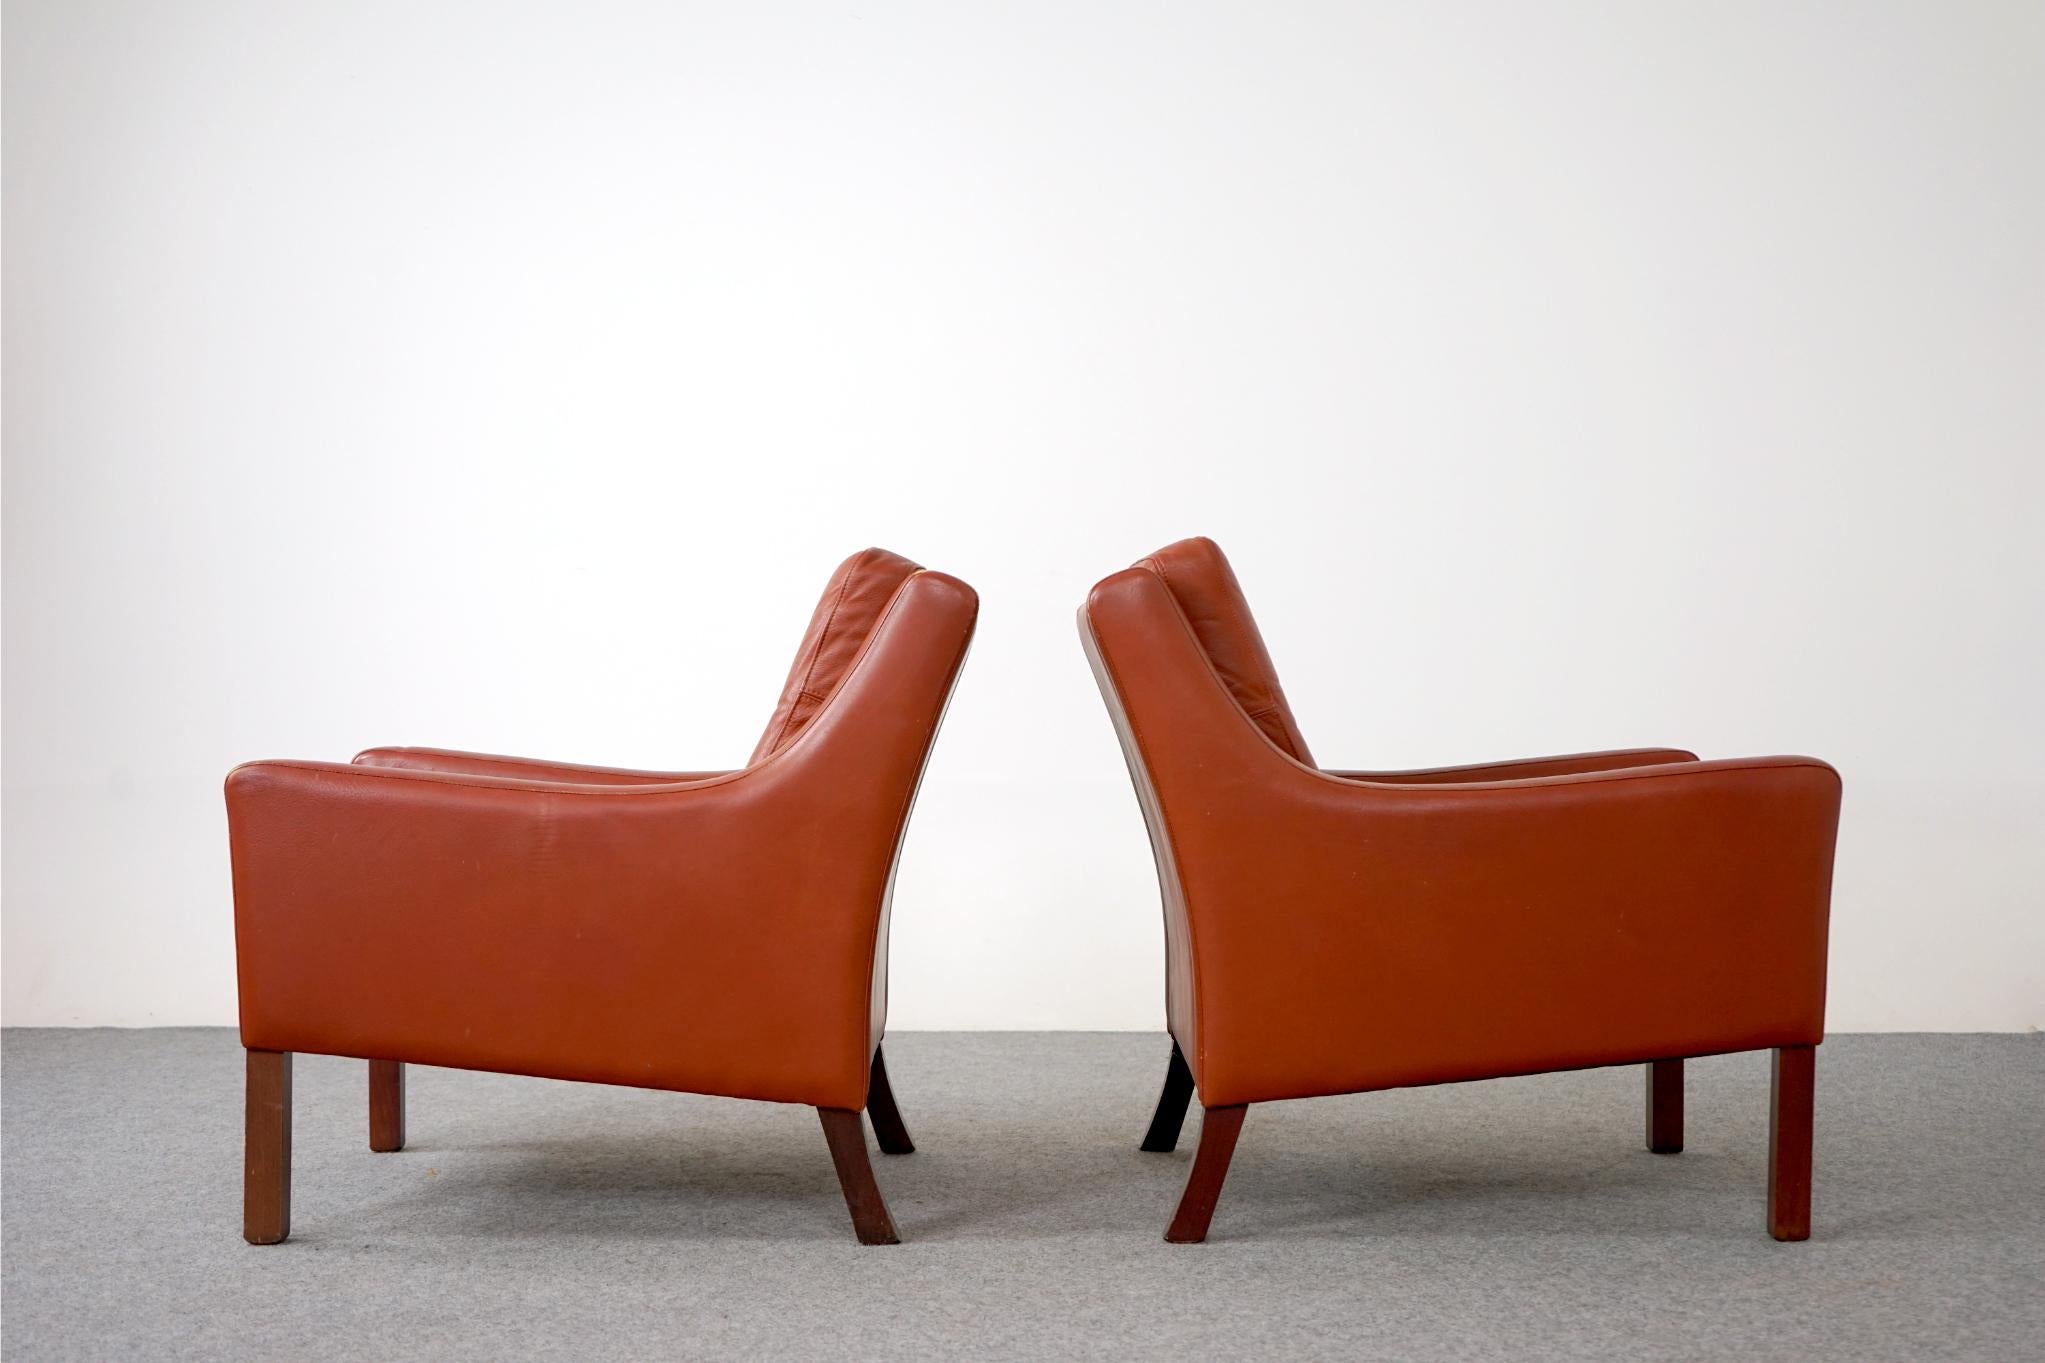 Pair of Danish Mid-Century Modern Tufted Leather Loungers For Sale 1